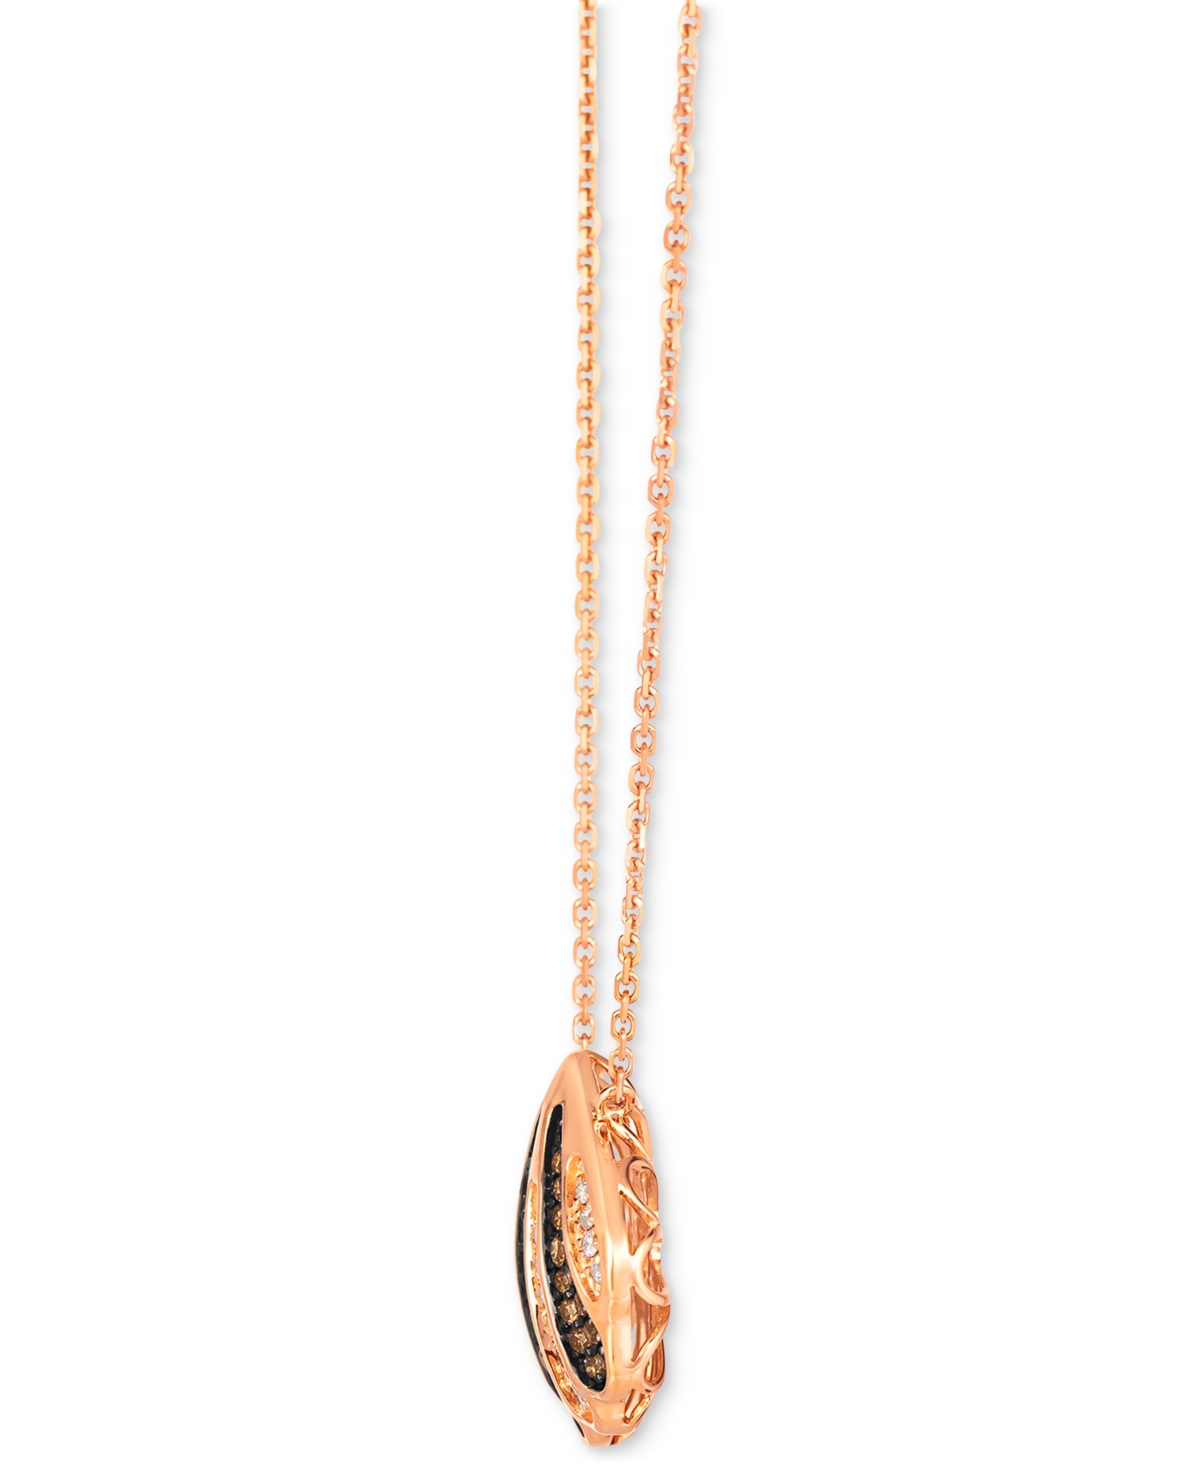 Shop Le Vian Chocolate Diamond & Nude Diamond Shell 19" Adjustable Pendant Necklace (5/8 Ct. T.w.) In 14k Rose Go In K Strawberry Gold Adjustable Necklace